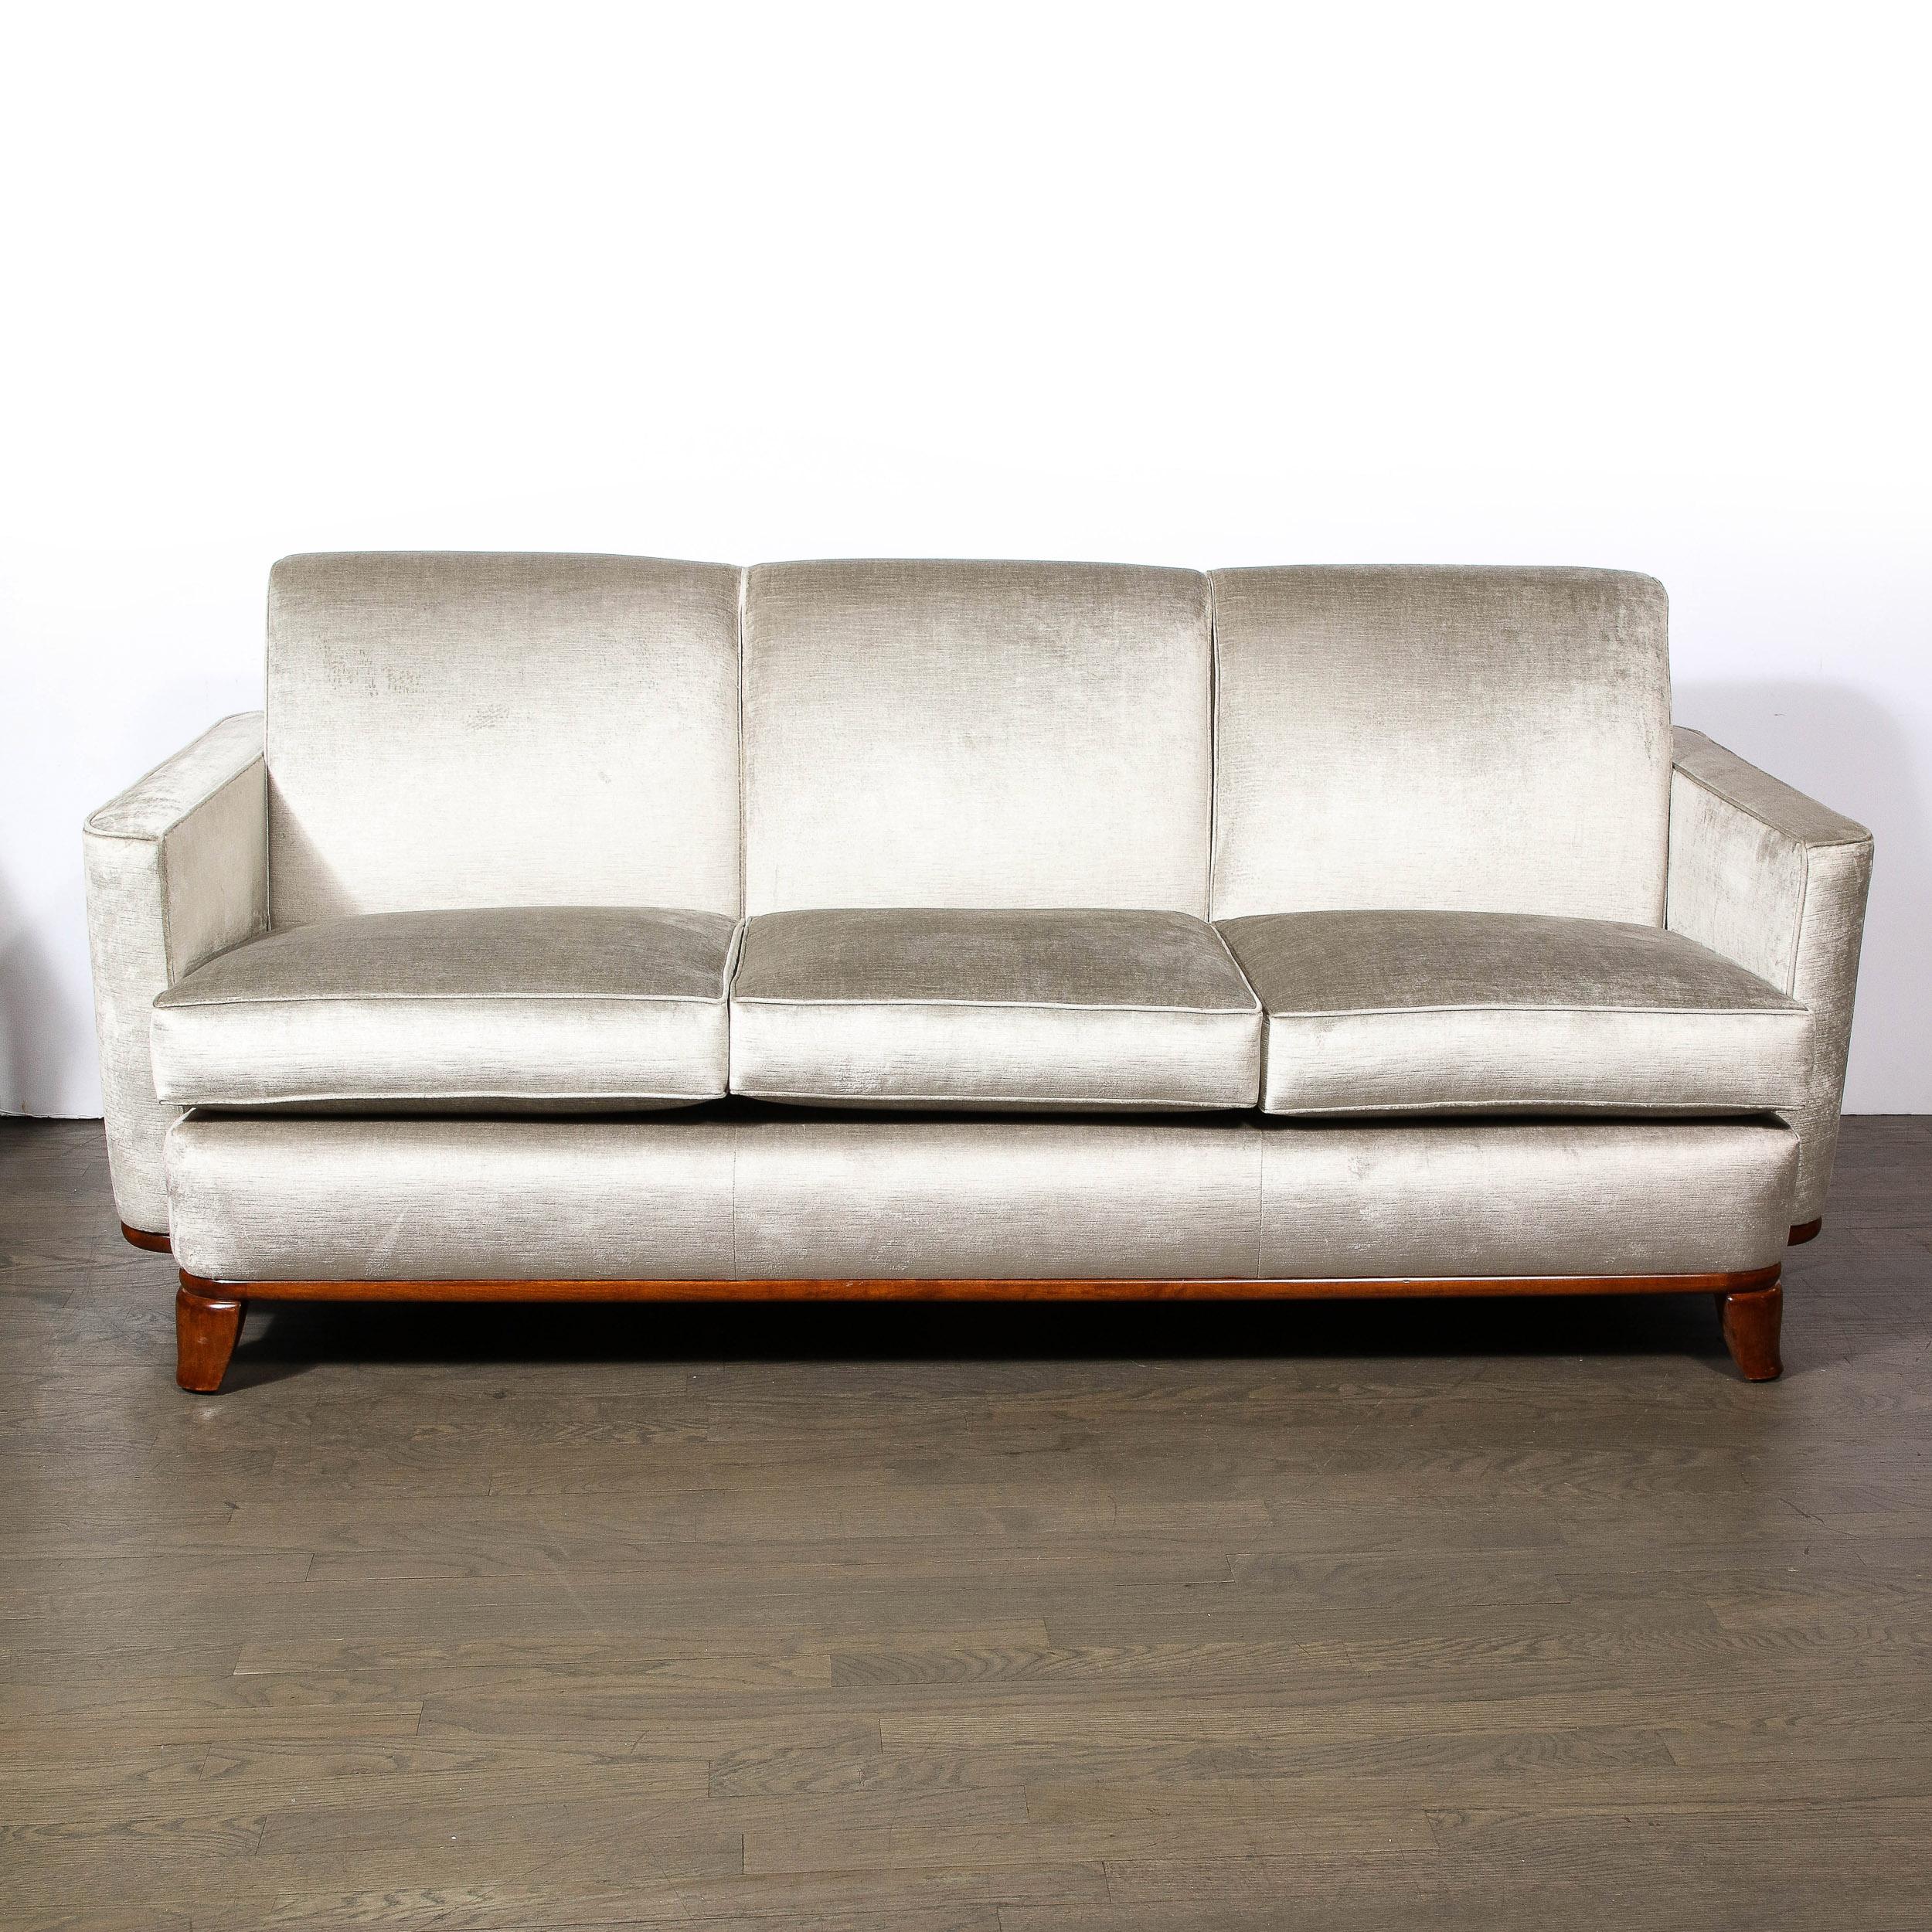 This stunning Art Deco Machine Age sofa was realized by the legendary Eugene Schoen in the United States circa 1935. It features three seat and back cushions; streamlined sides; and a stacked skyscraper style back- all newly reupholstered in a